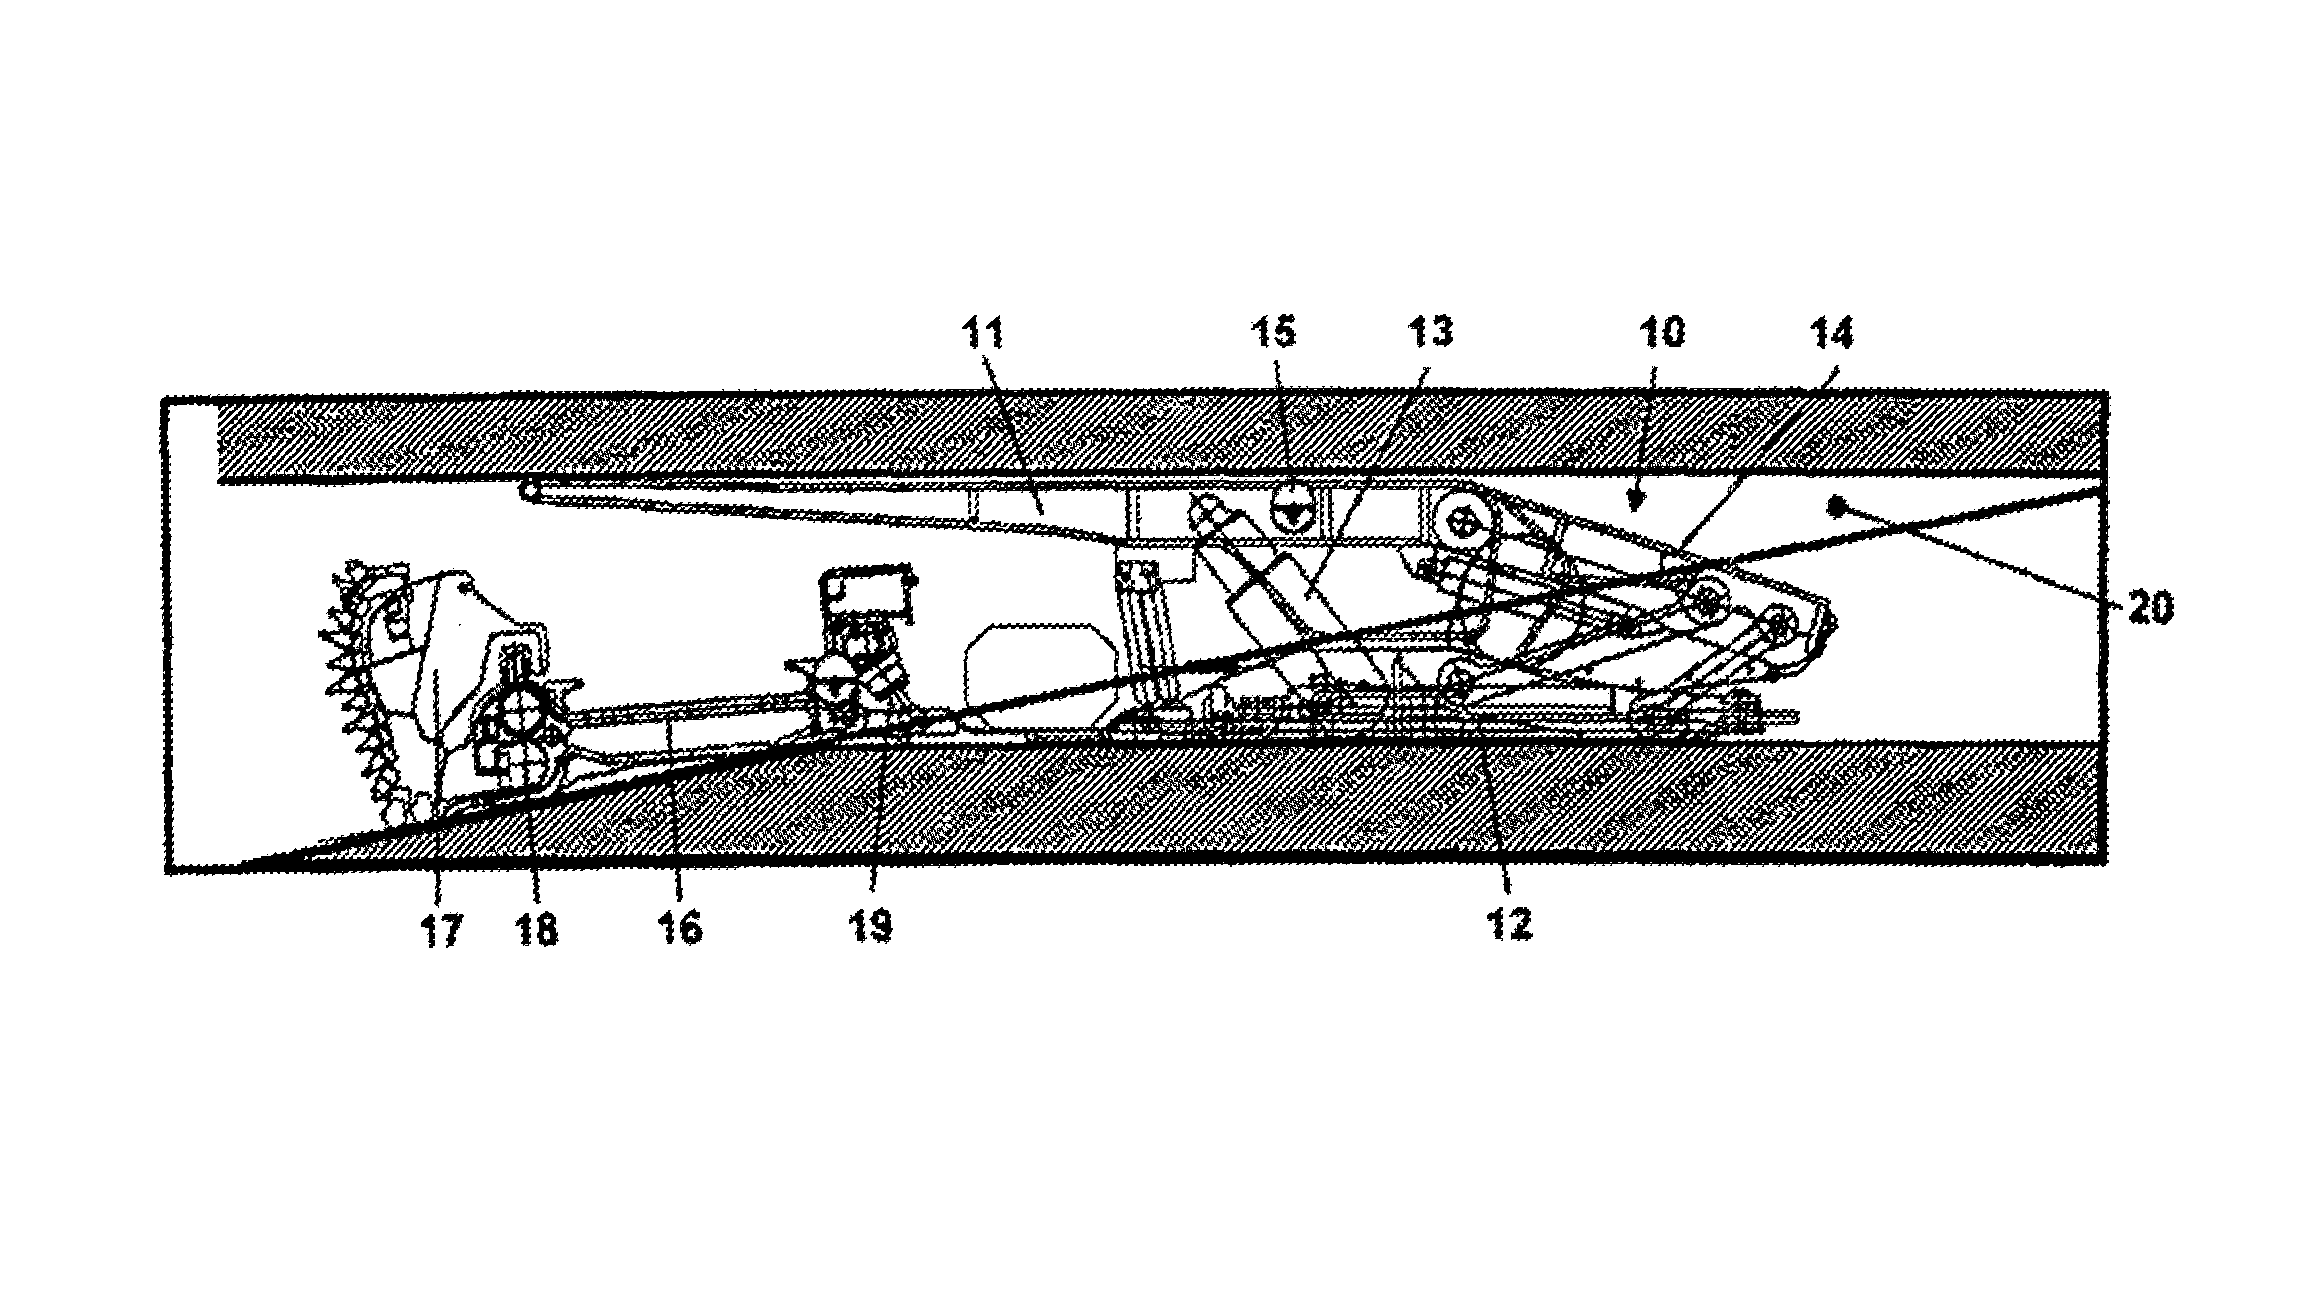 Method of setting an automatic level control of the plow in plowing operations of coal mining